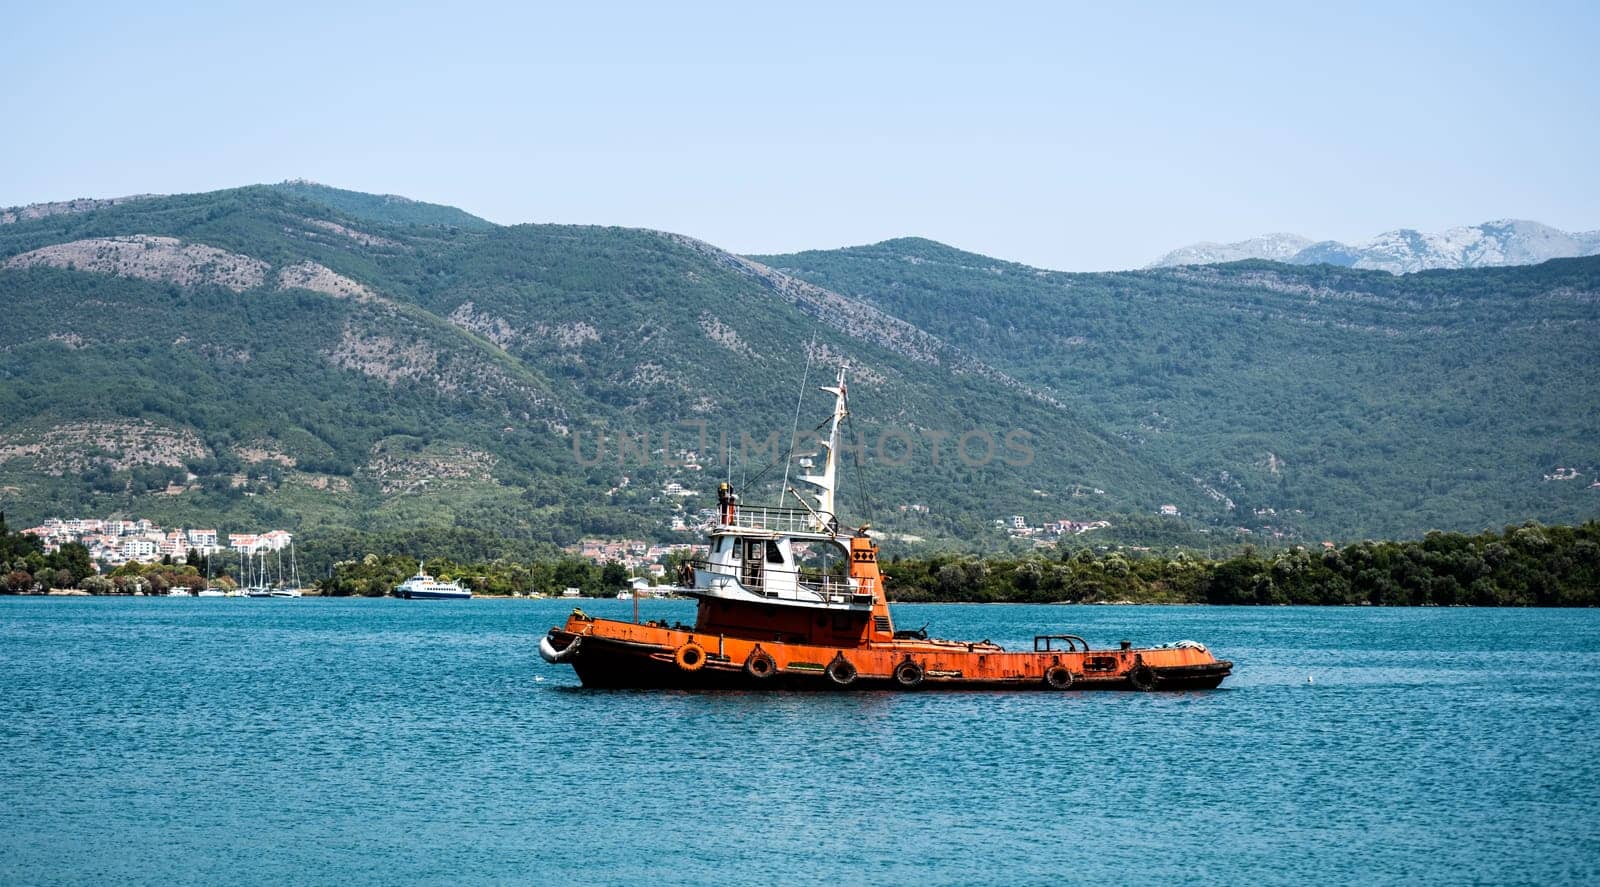 Boat in Adriatic sea, Montenegro with scenic mountains and forest on background. Ship in Mediterranean nature in sunny summer day